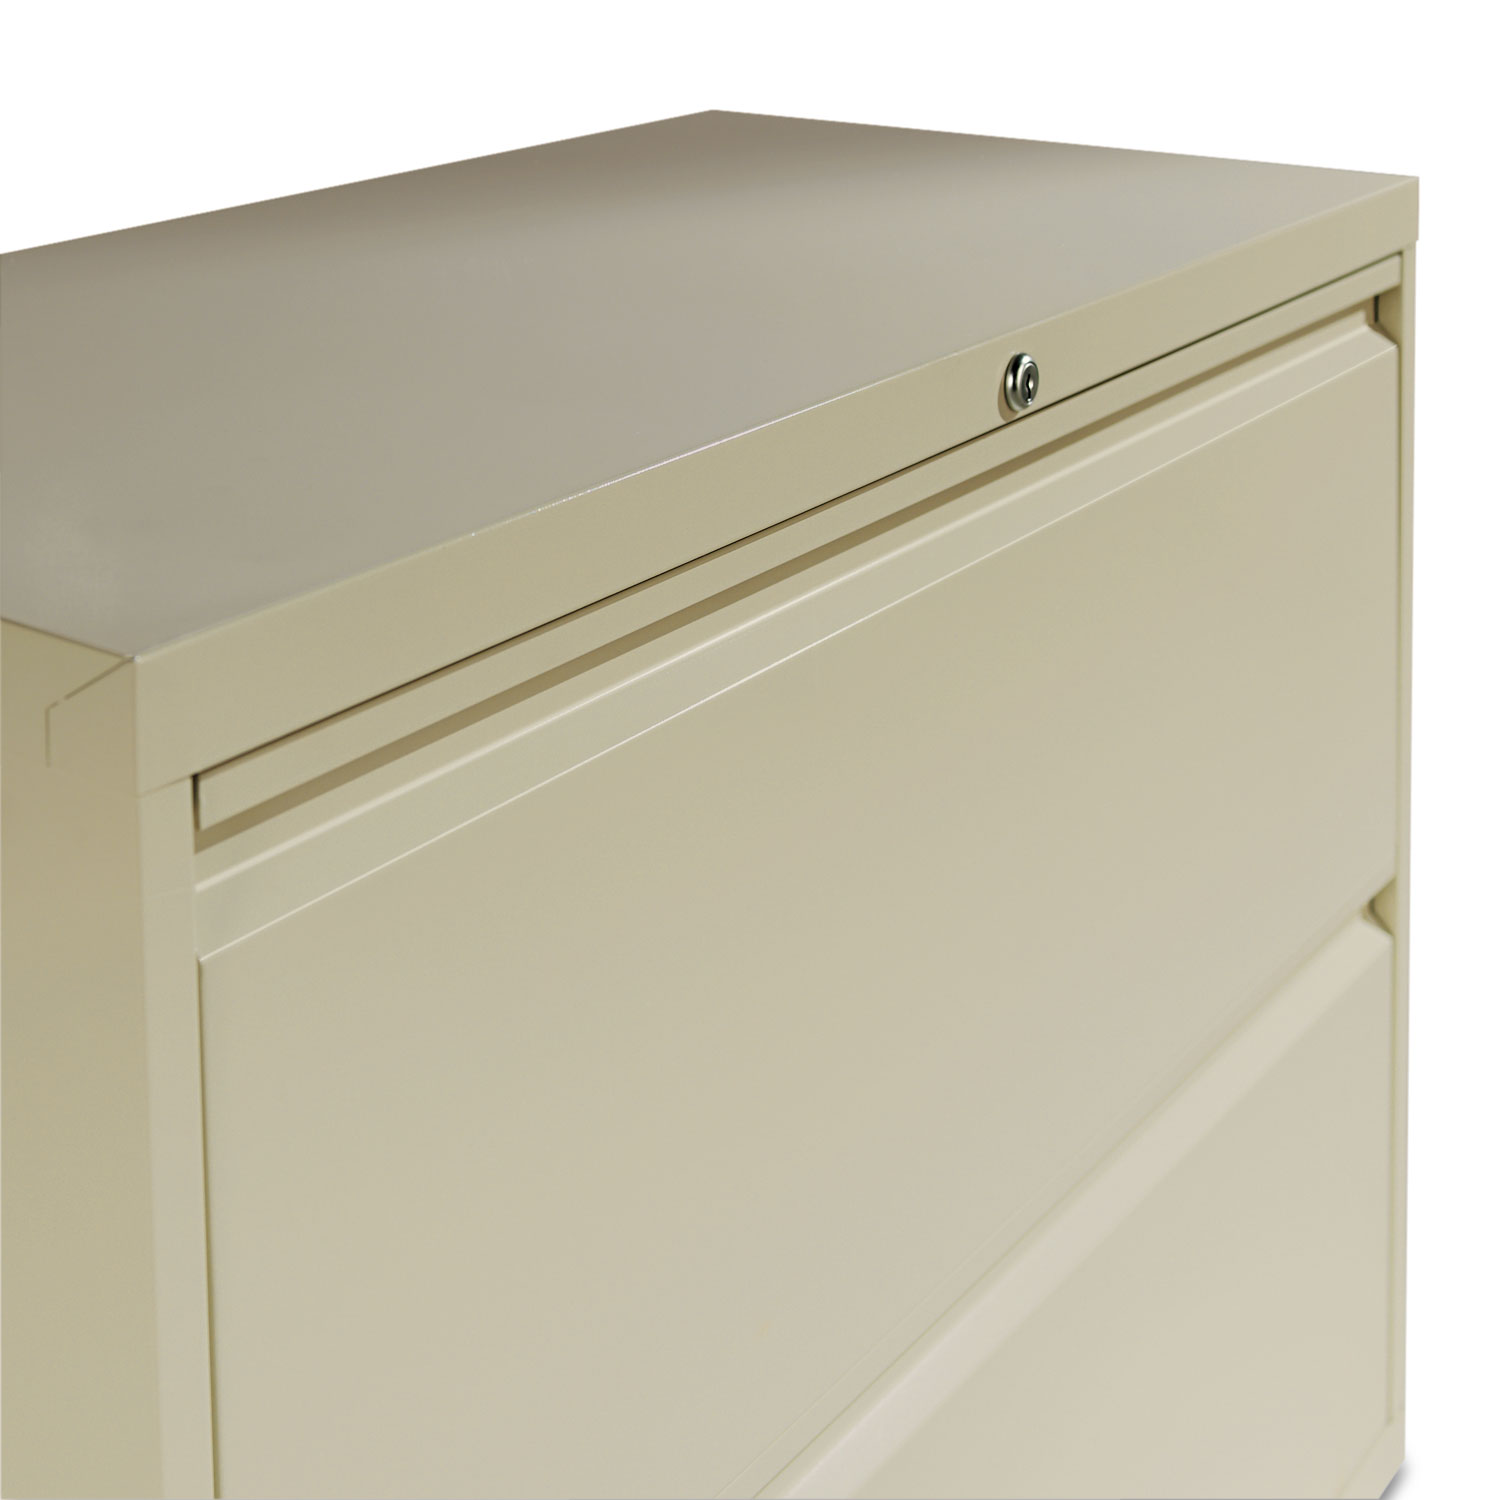 Four-Drawer Lateral File Cabinet, 36w x 18d x 52 1/2h, Putty